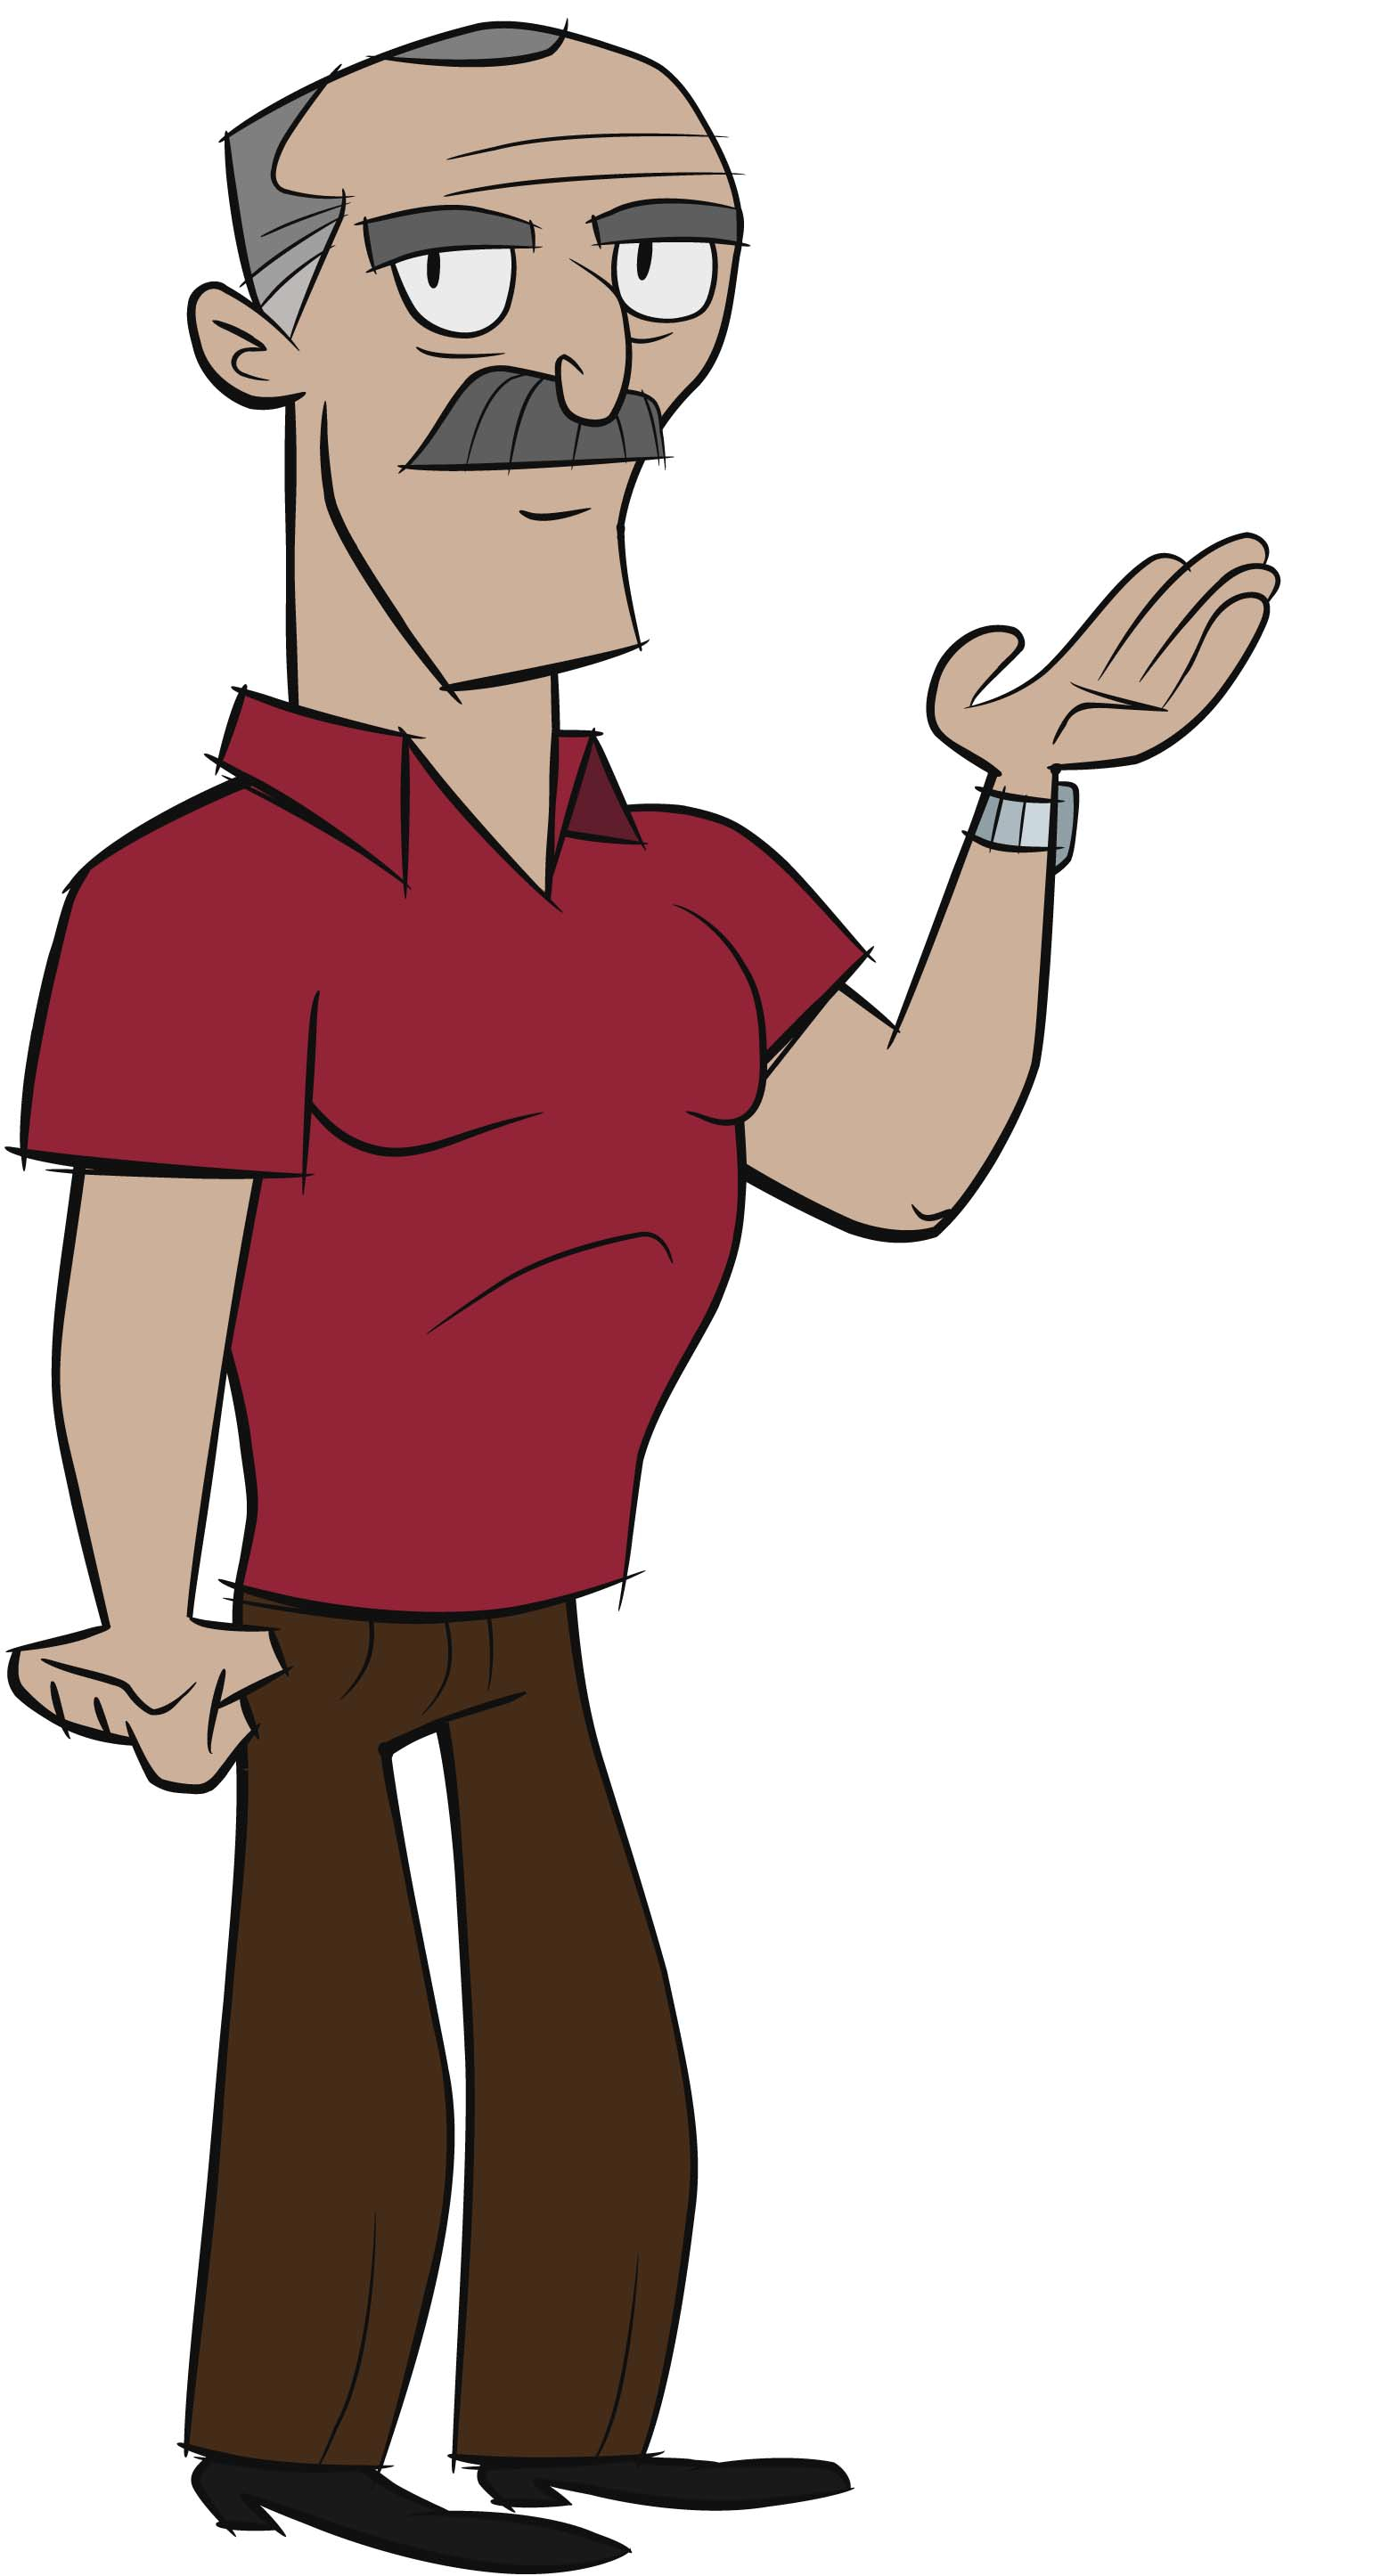 Michael Gross voices the character of 